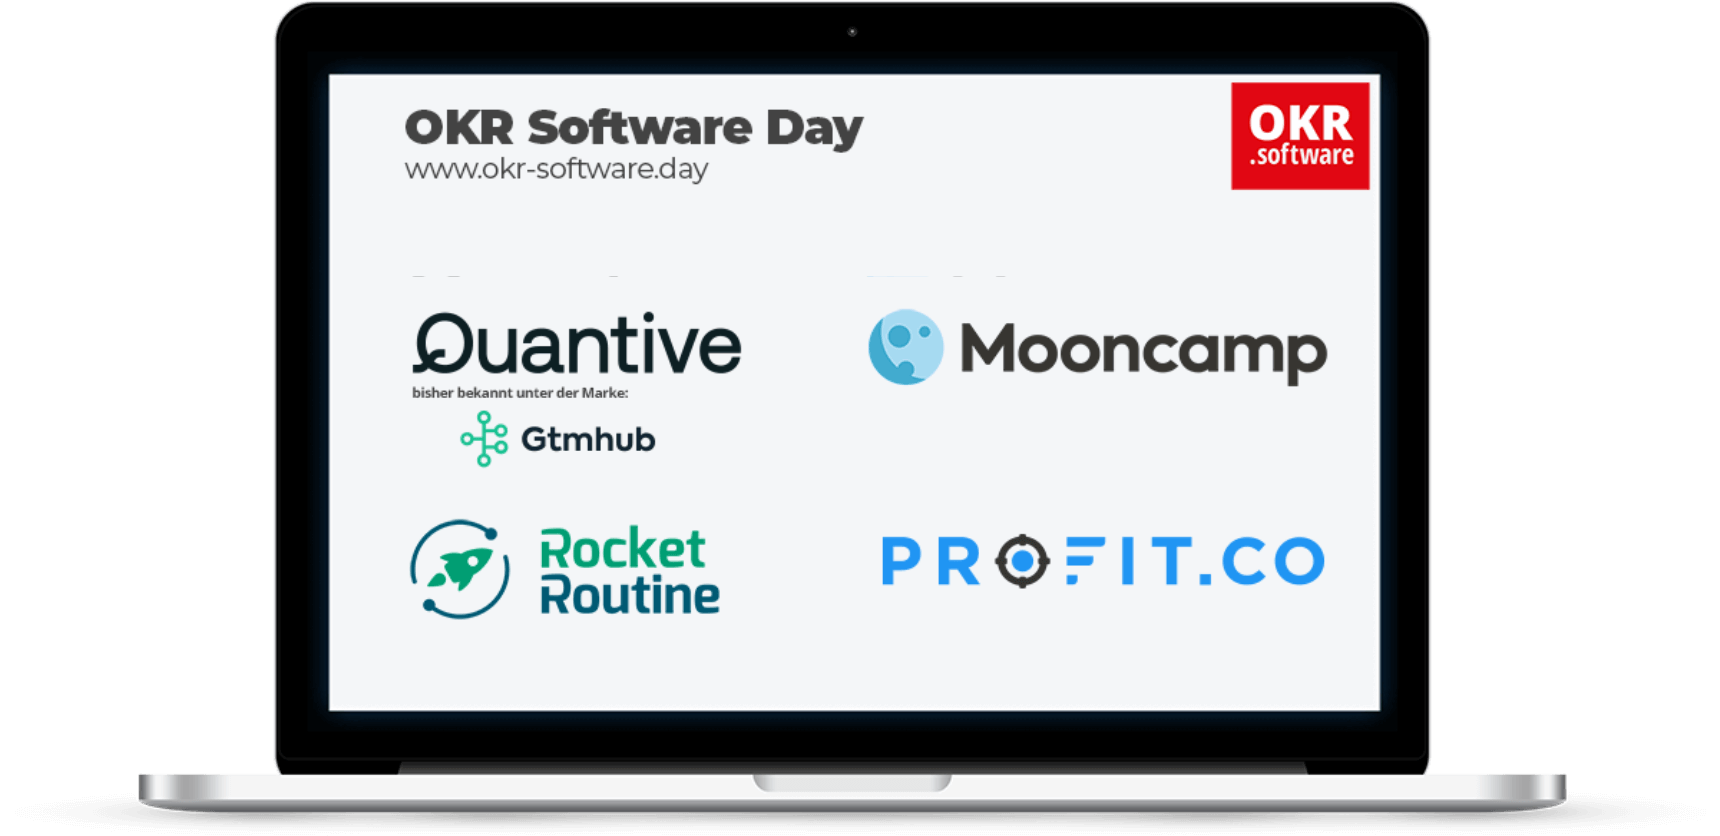 OKR Software Day